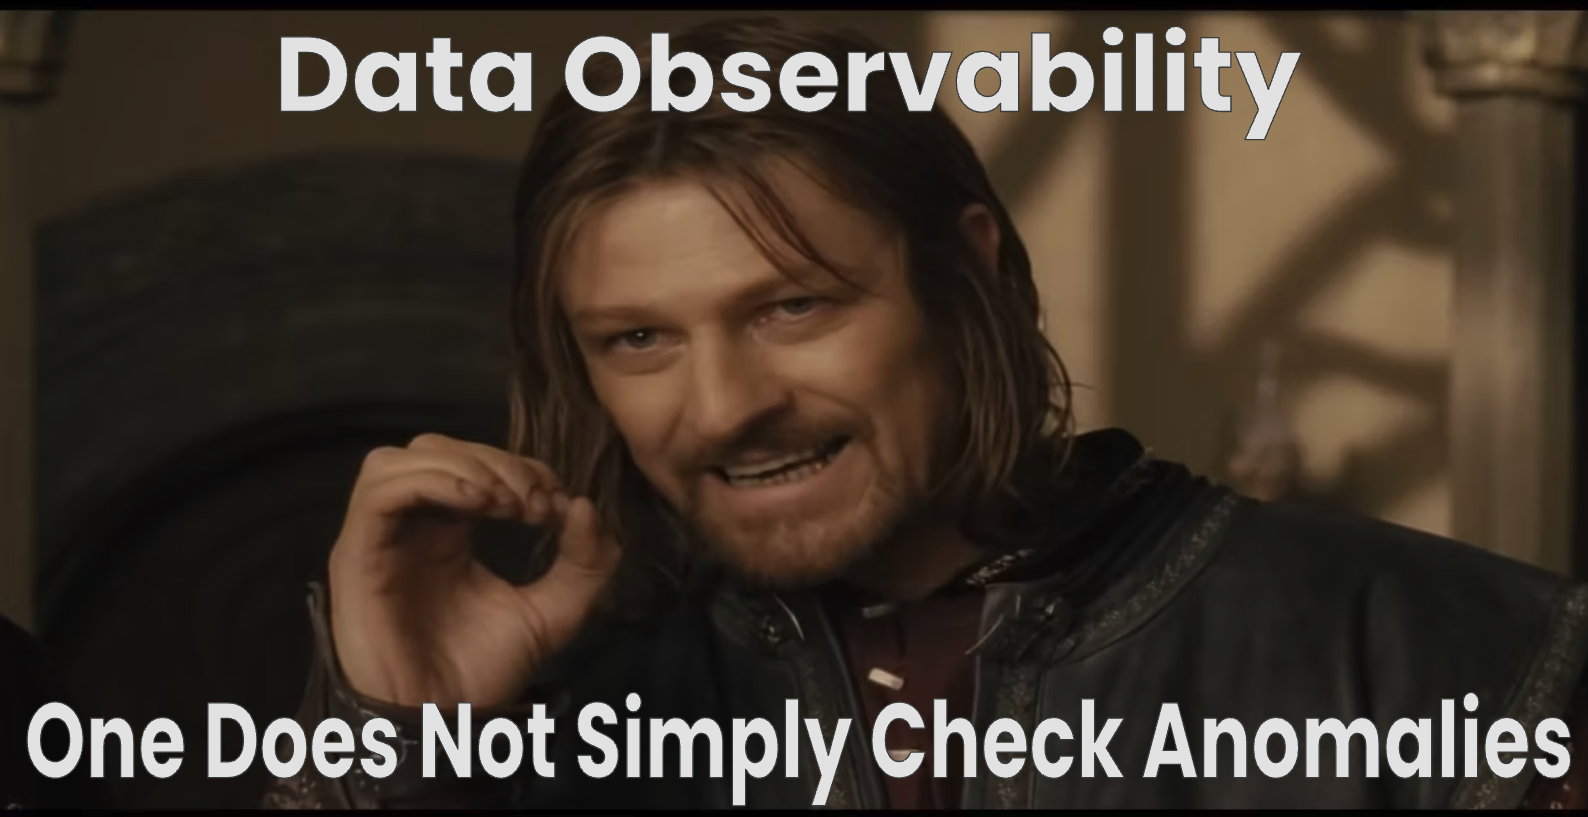 The Five Use Cases in Data Observability: Overview